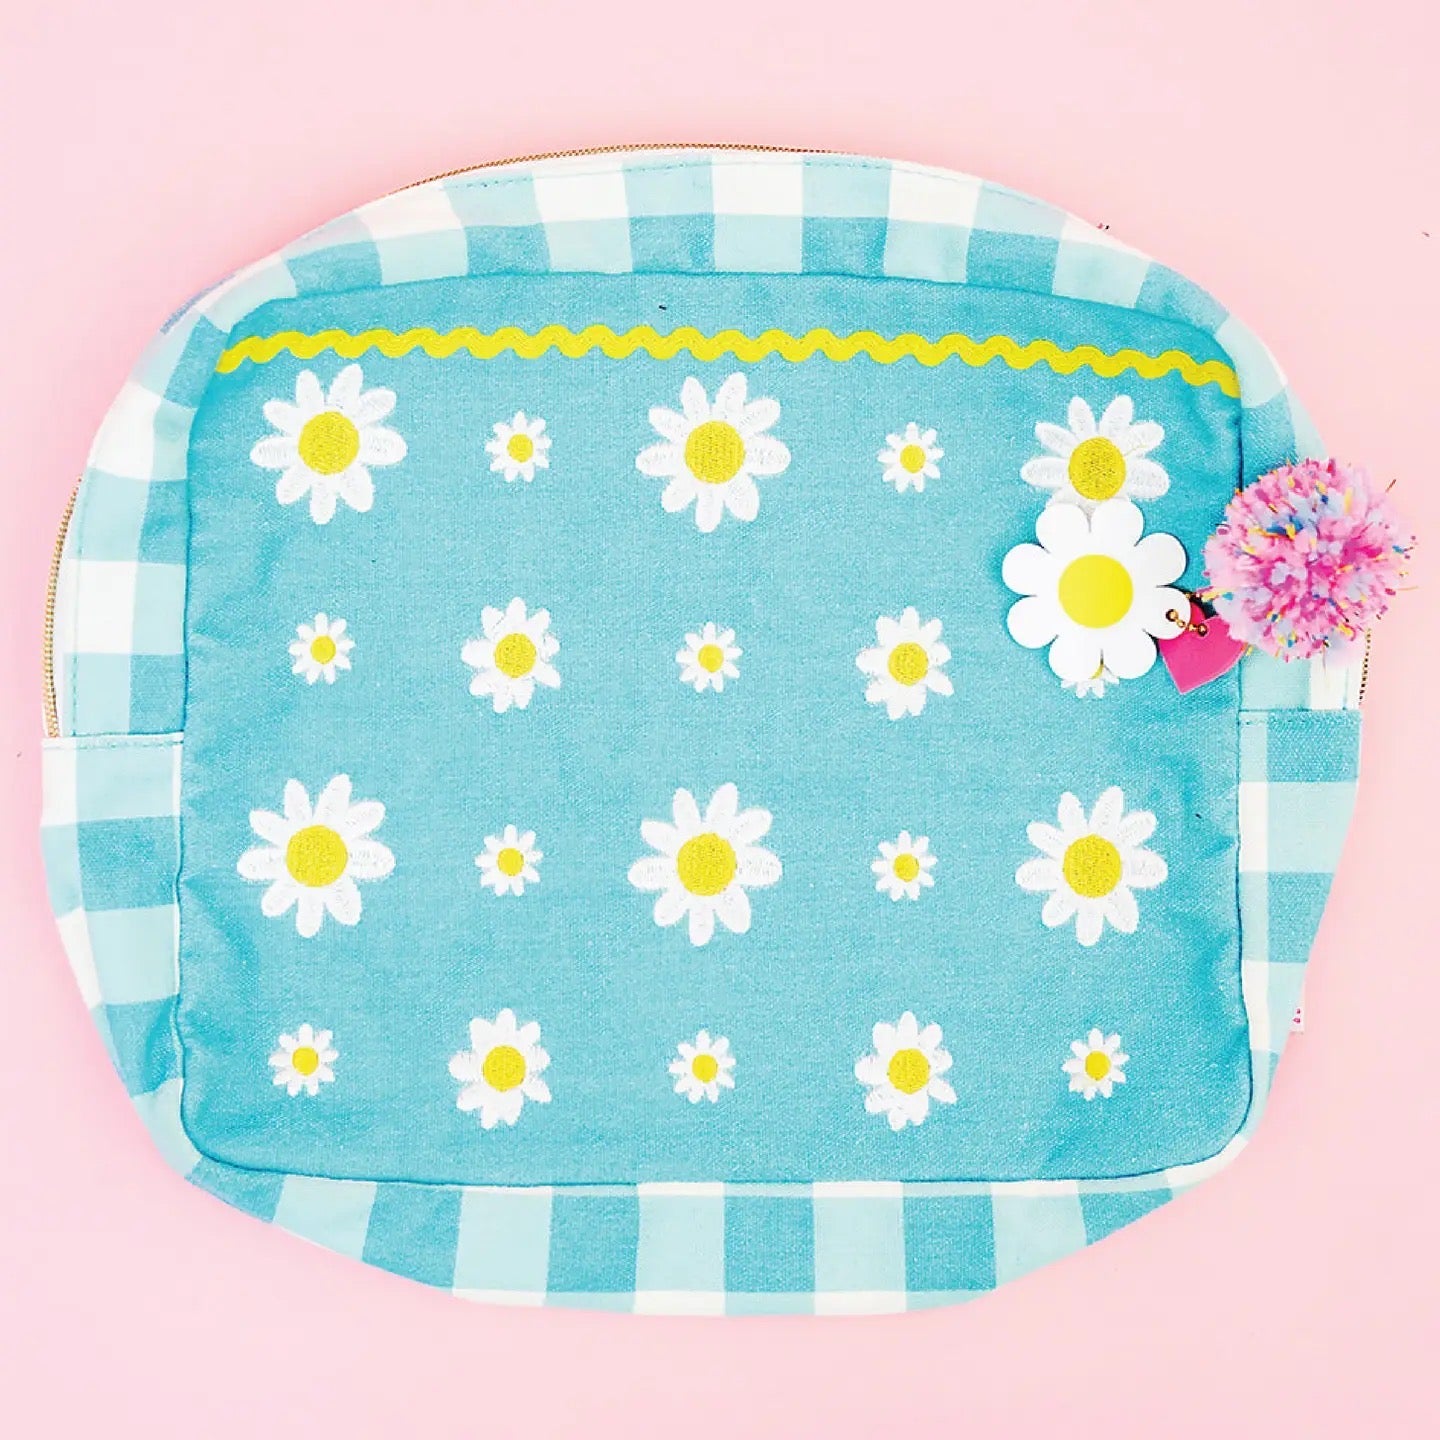 Daisy Darling - Large Pouch